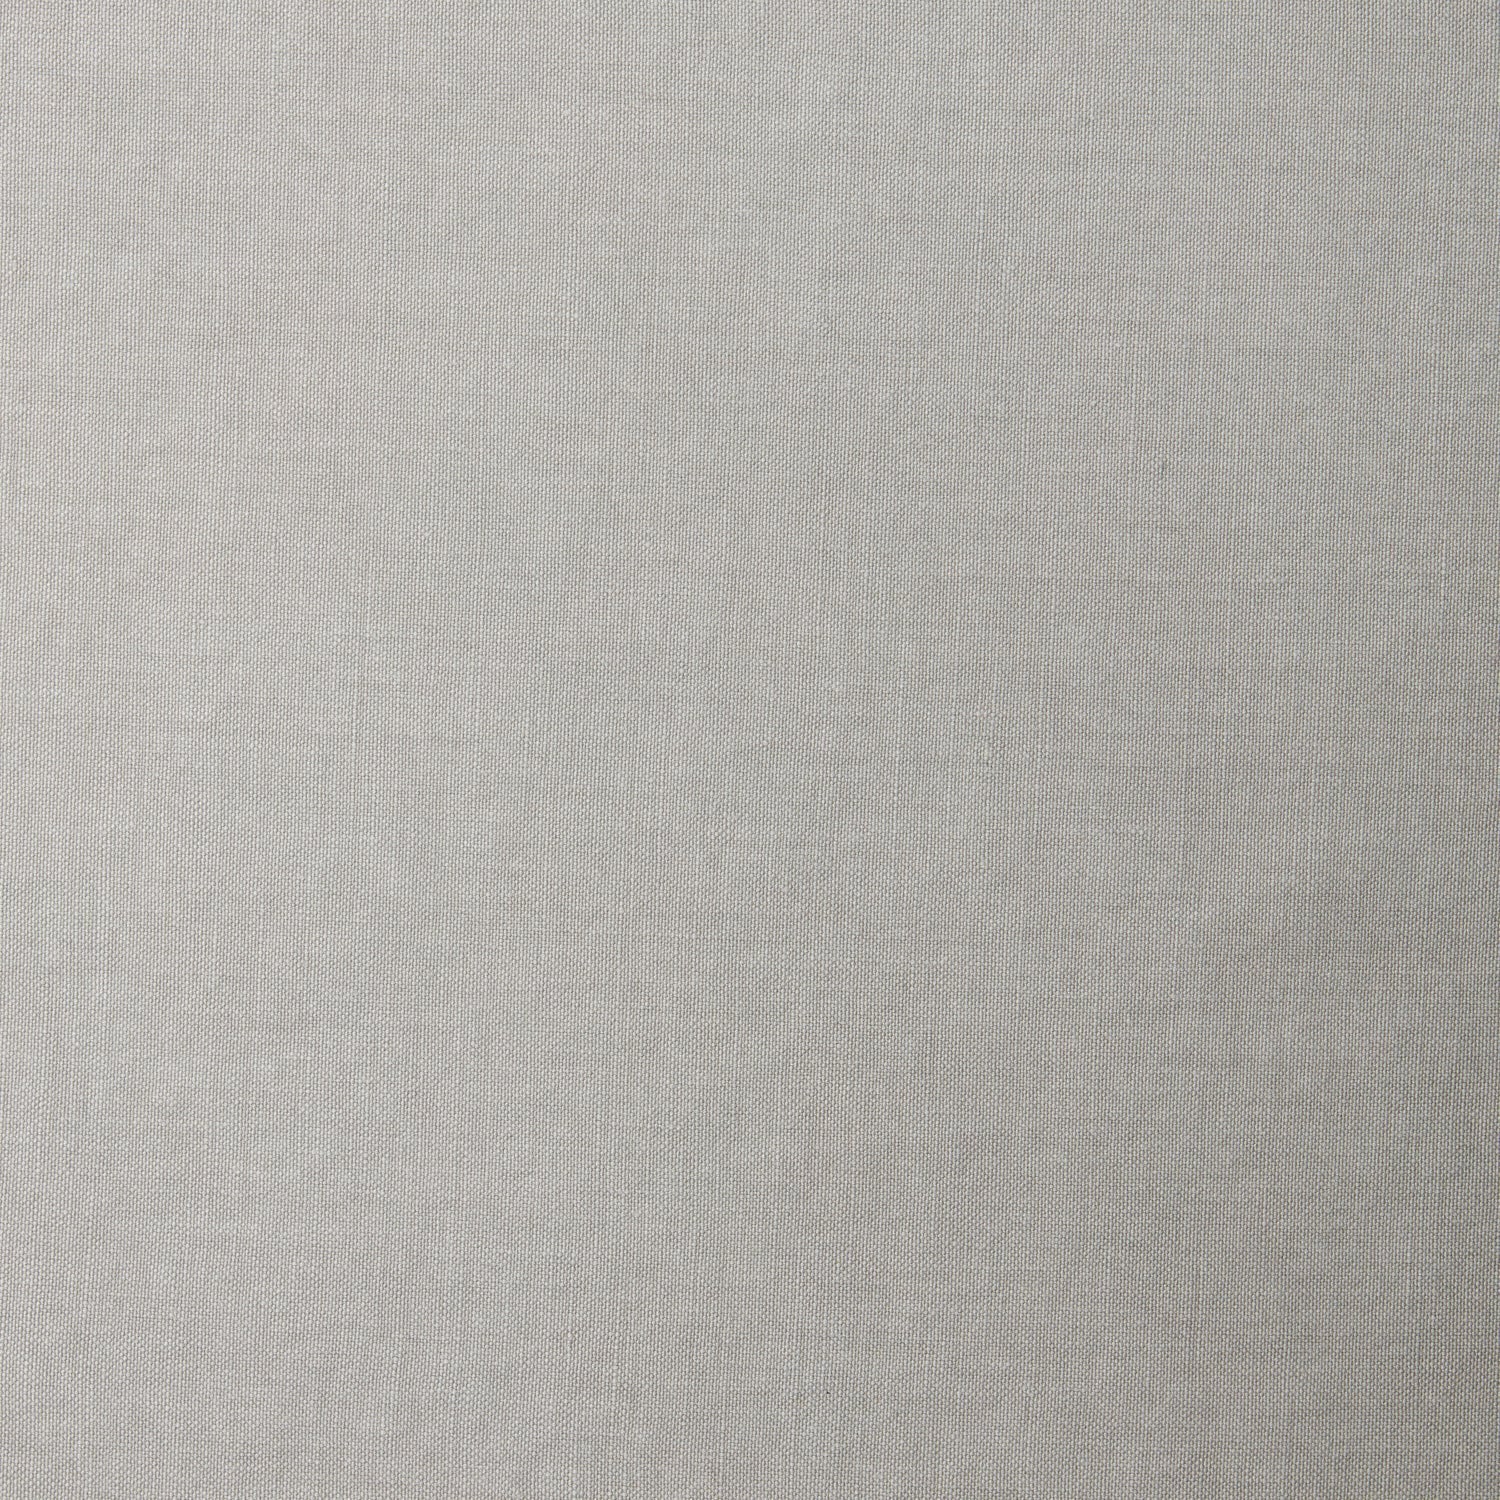 A swatch of linen fabric in a solid light gray color.